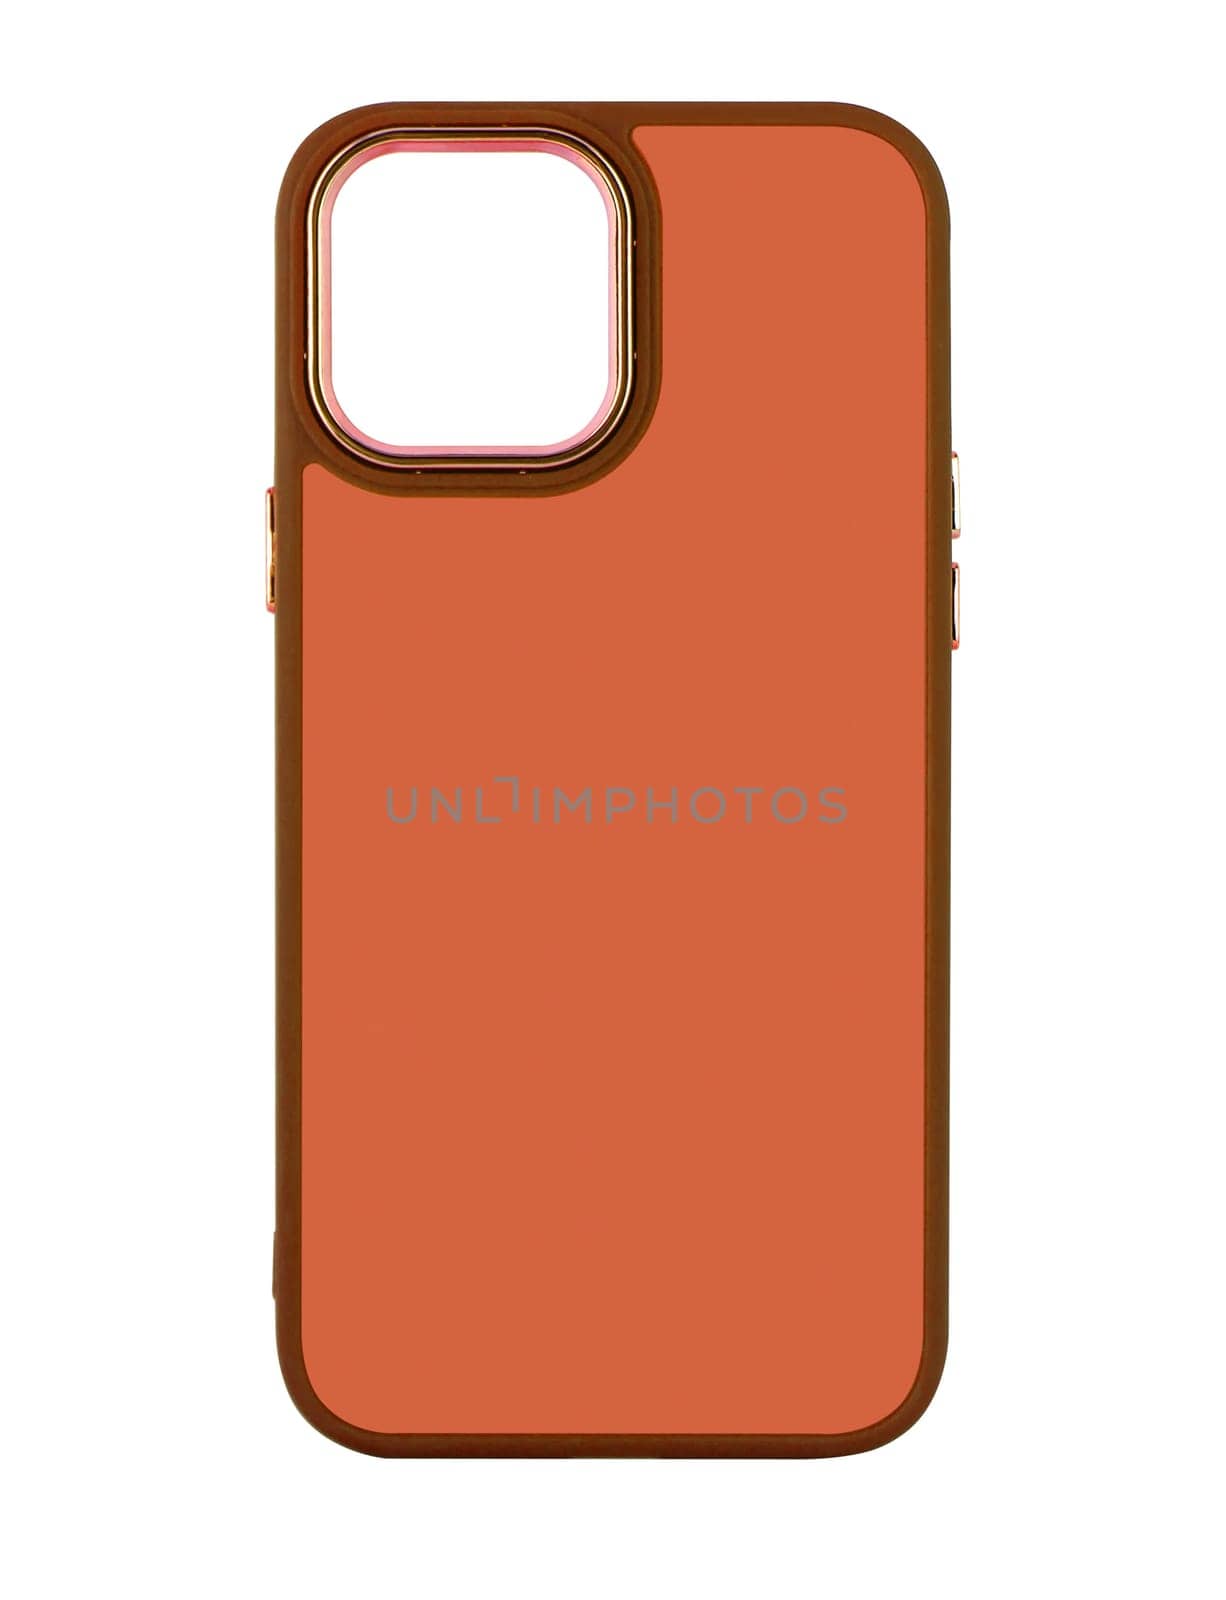 Silicone phone case on white background in insulation by A_A